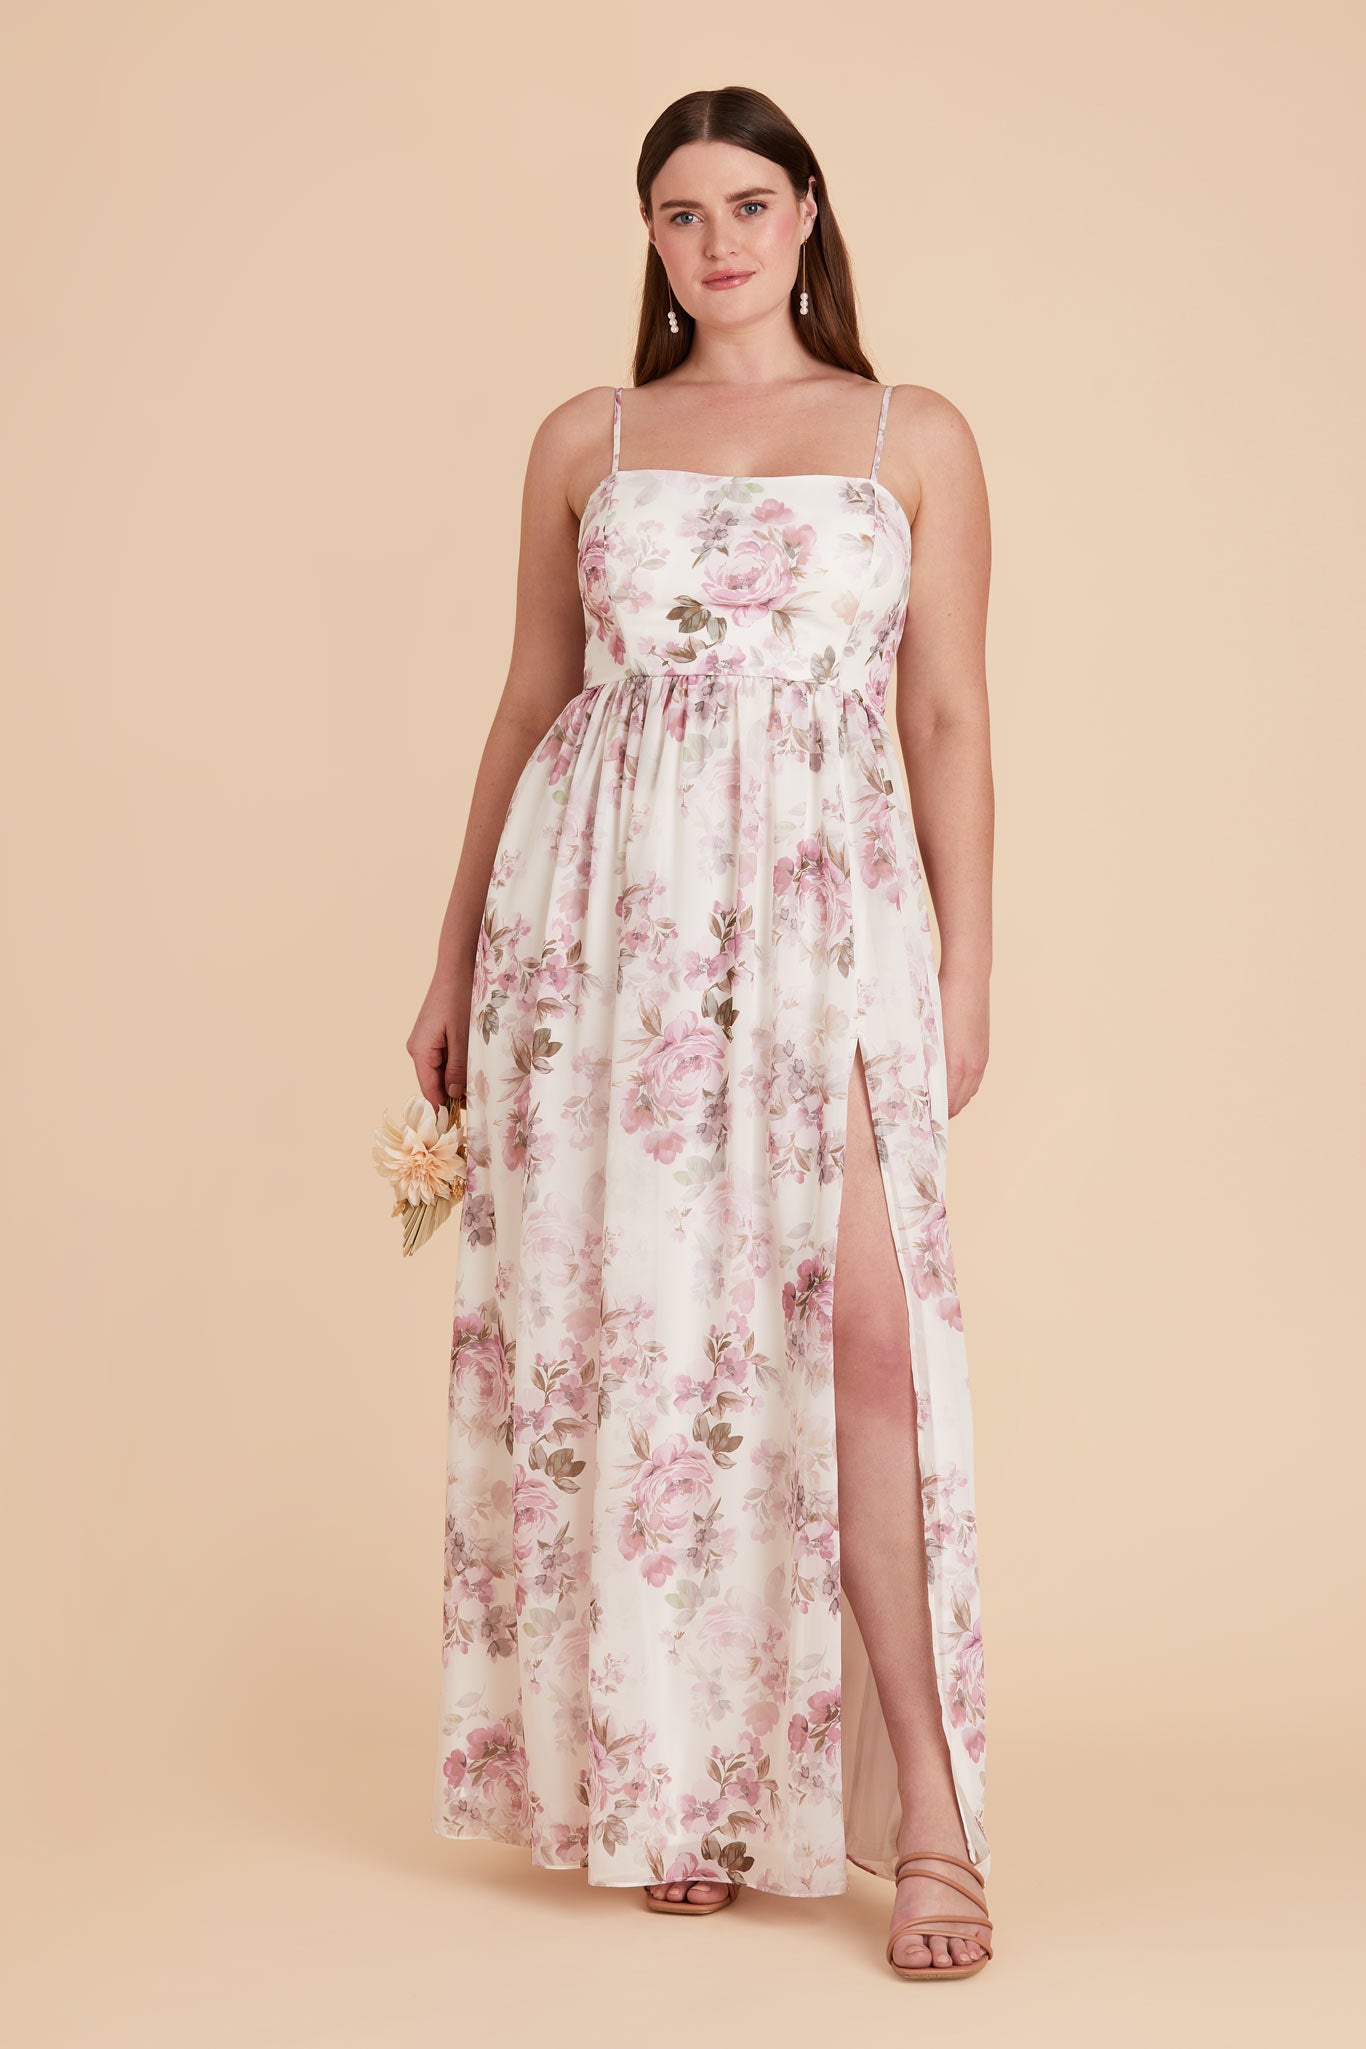 Dusty Pink Peonies August Convertible Dress by Birdy Grey